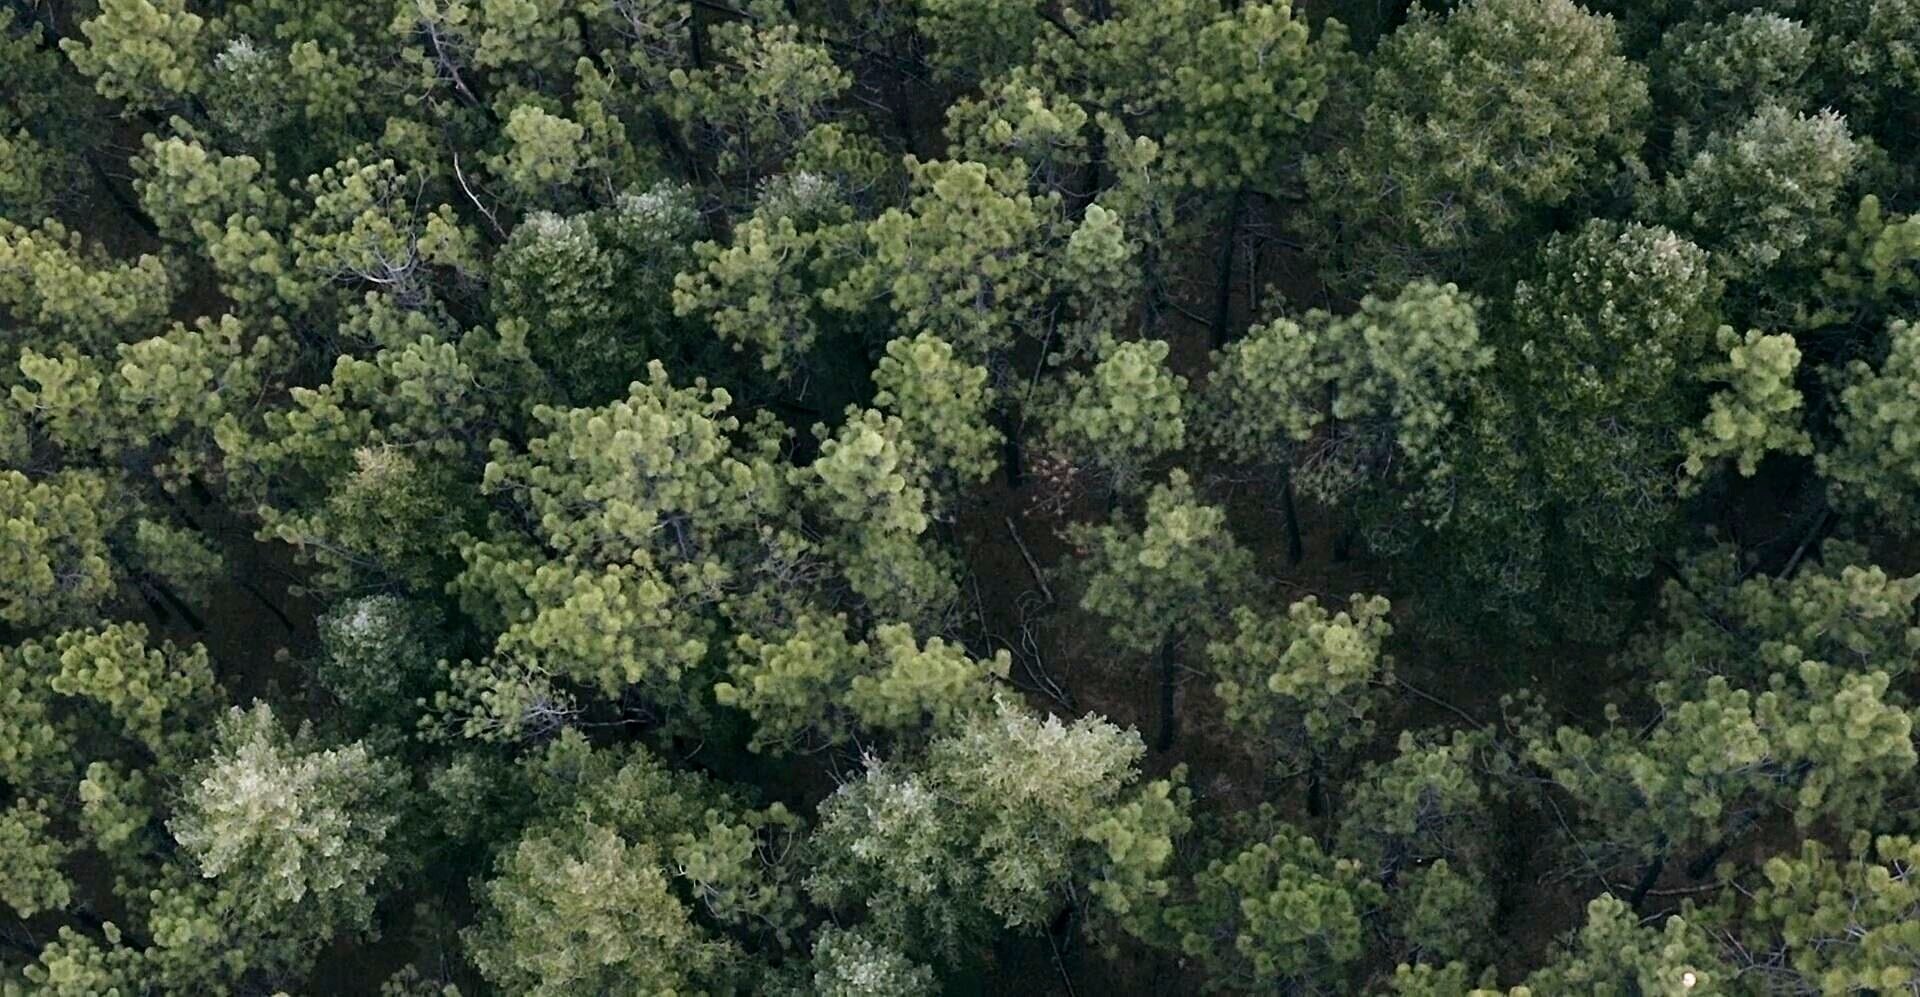  Ariel shot of trees. Ohh ahh, how cinematic! 